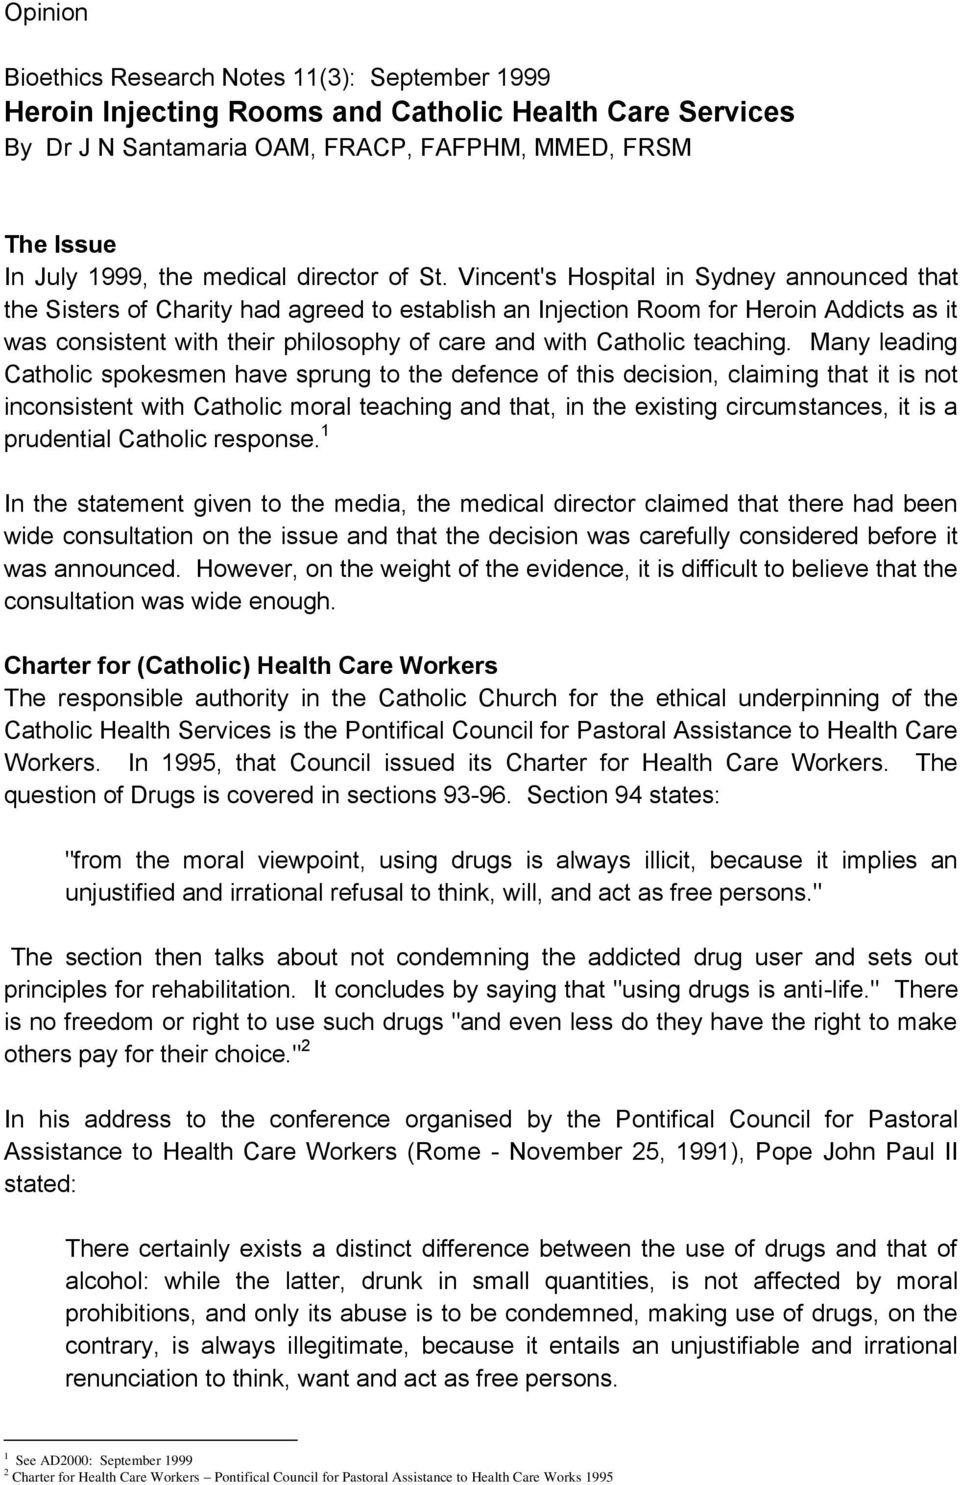 Vincent's Hospital in Sydney announced that the Sisters of Charity had agreed to establish an Injection Room for Heroin Addicts as it was consistent with their philosophy of care and with Catholic